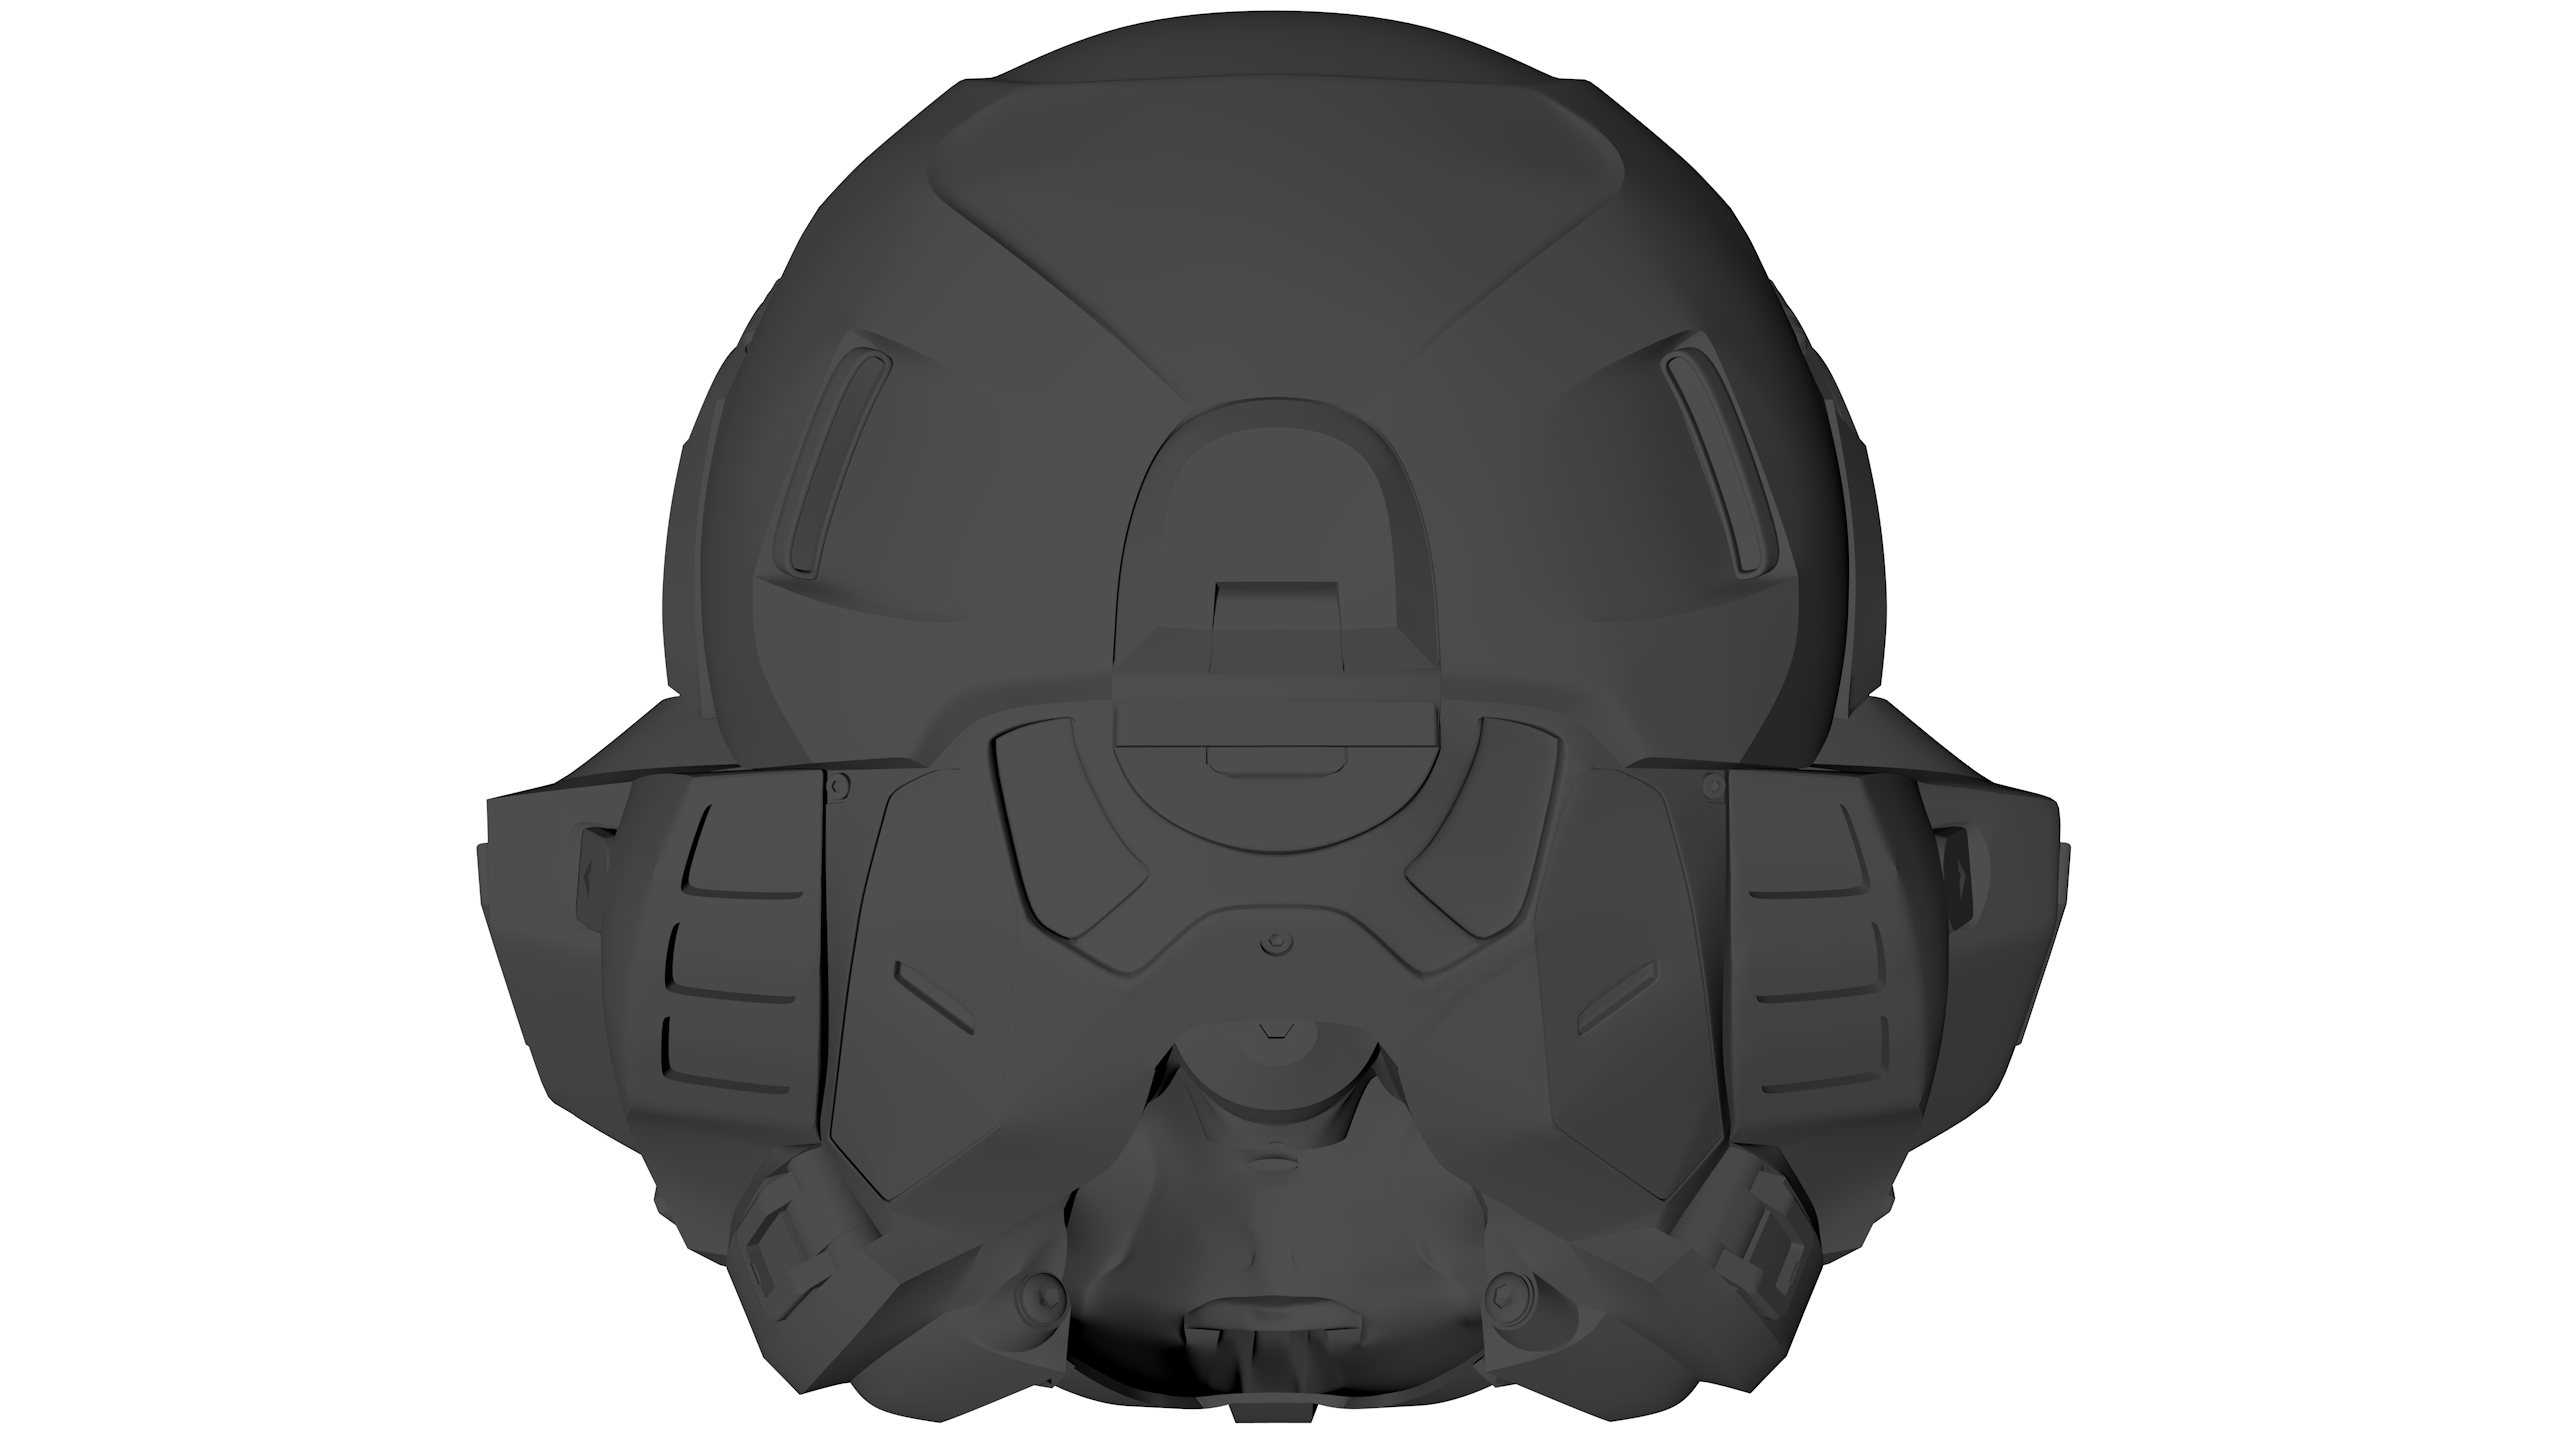 Halo 5 Master Chief Helmet for Cosplay 3D model 3D printable